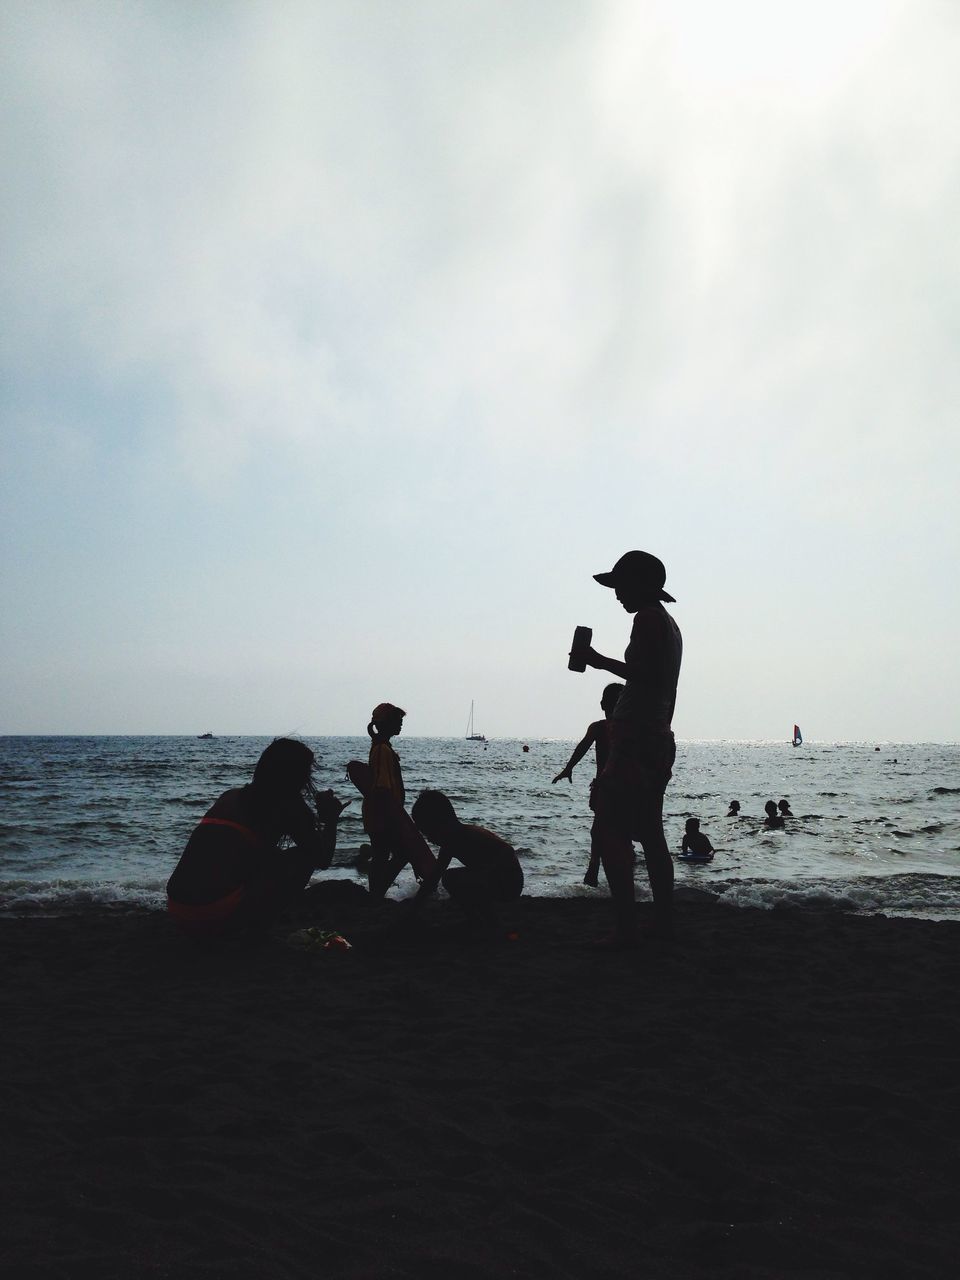 sea, water, leisure activity, lifestyles, horizon over water, sky, men, beach, togetherness, boys, full length, childhood, shore, bonding, vacations, transportation, silhouette, nature